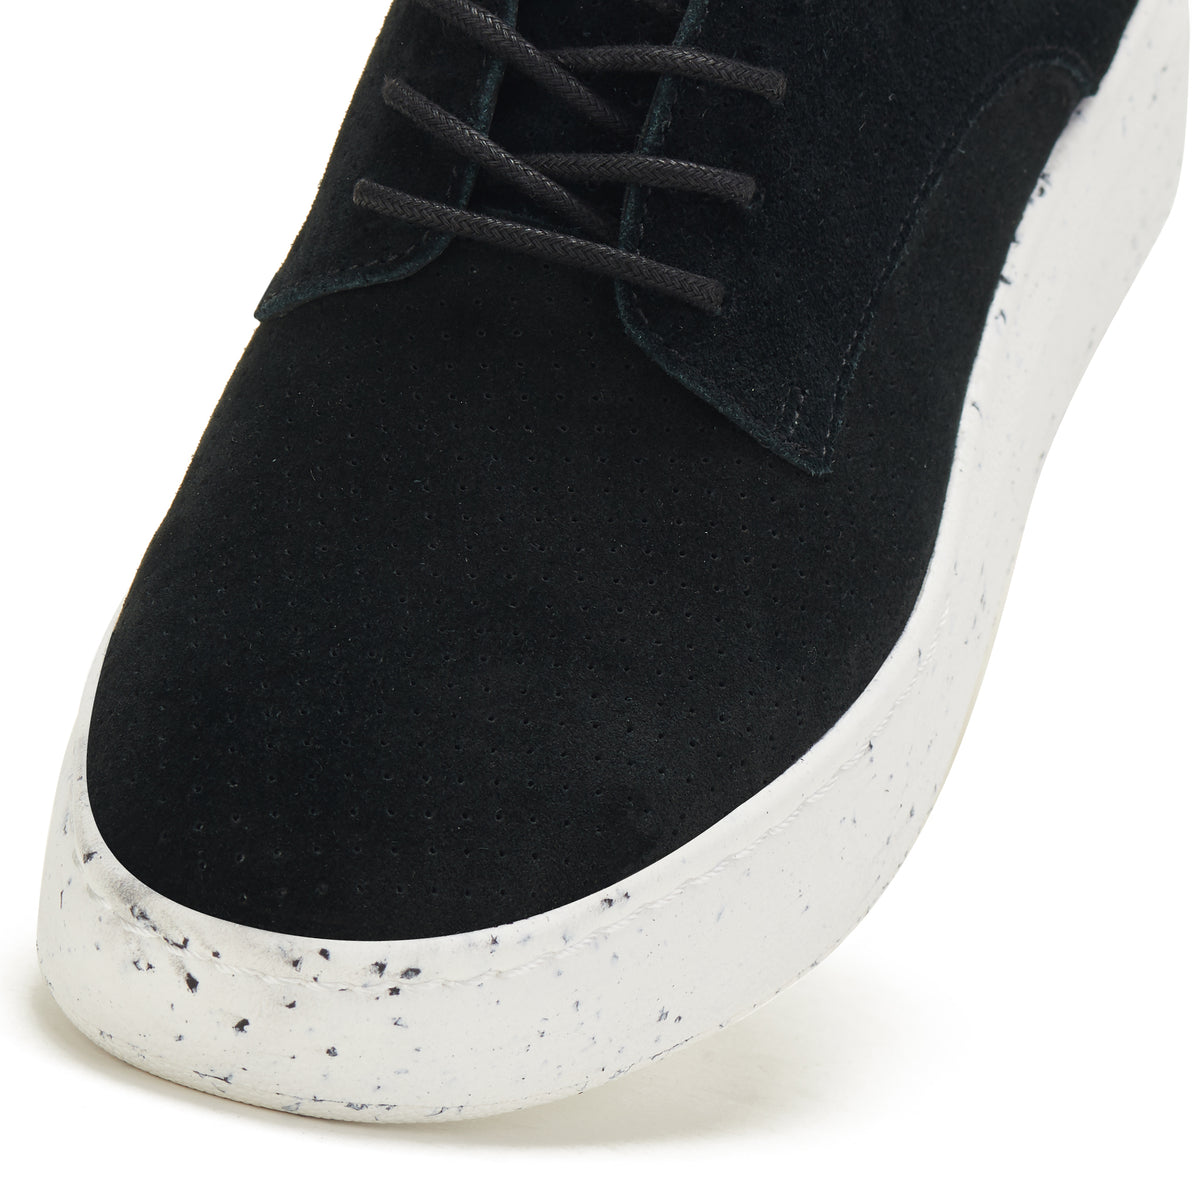 Derby City Pin Punch Black Suede